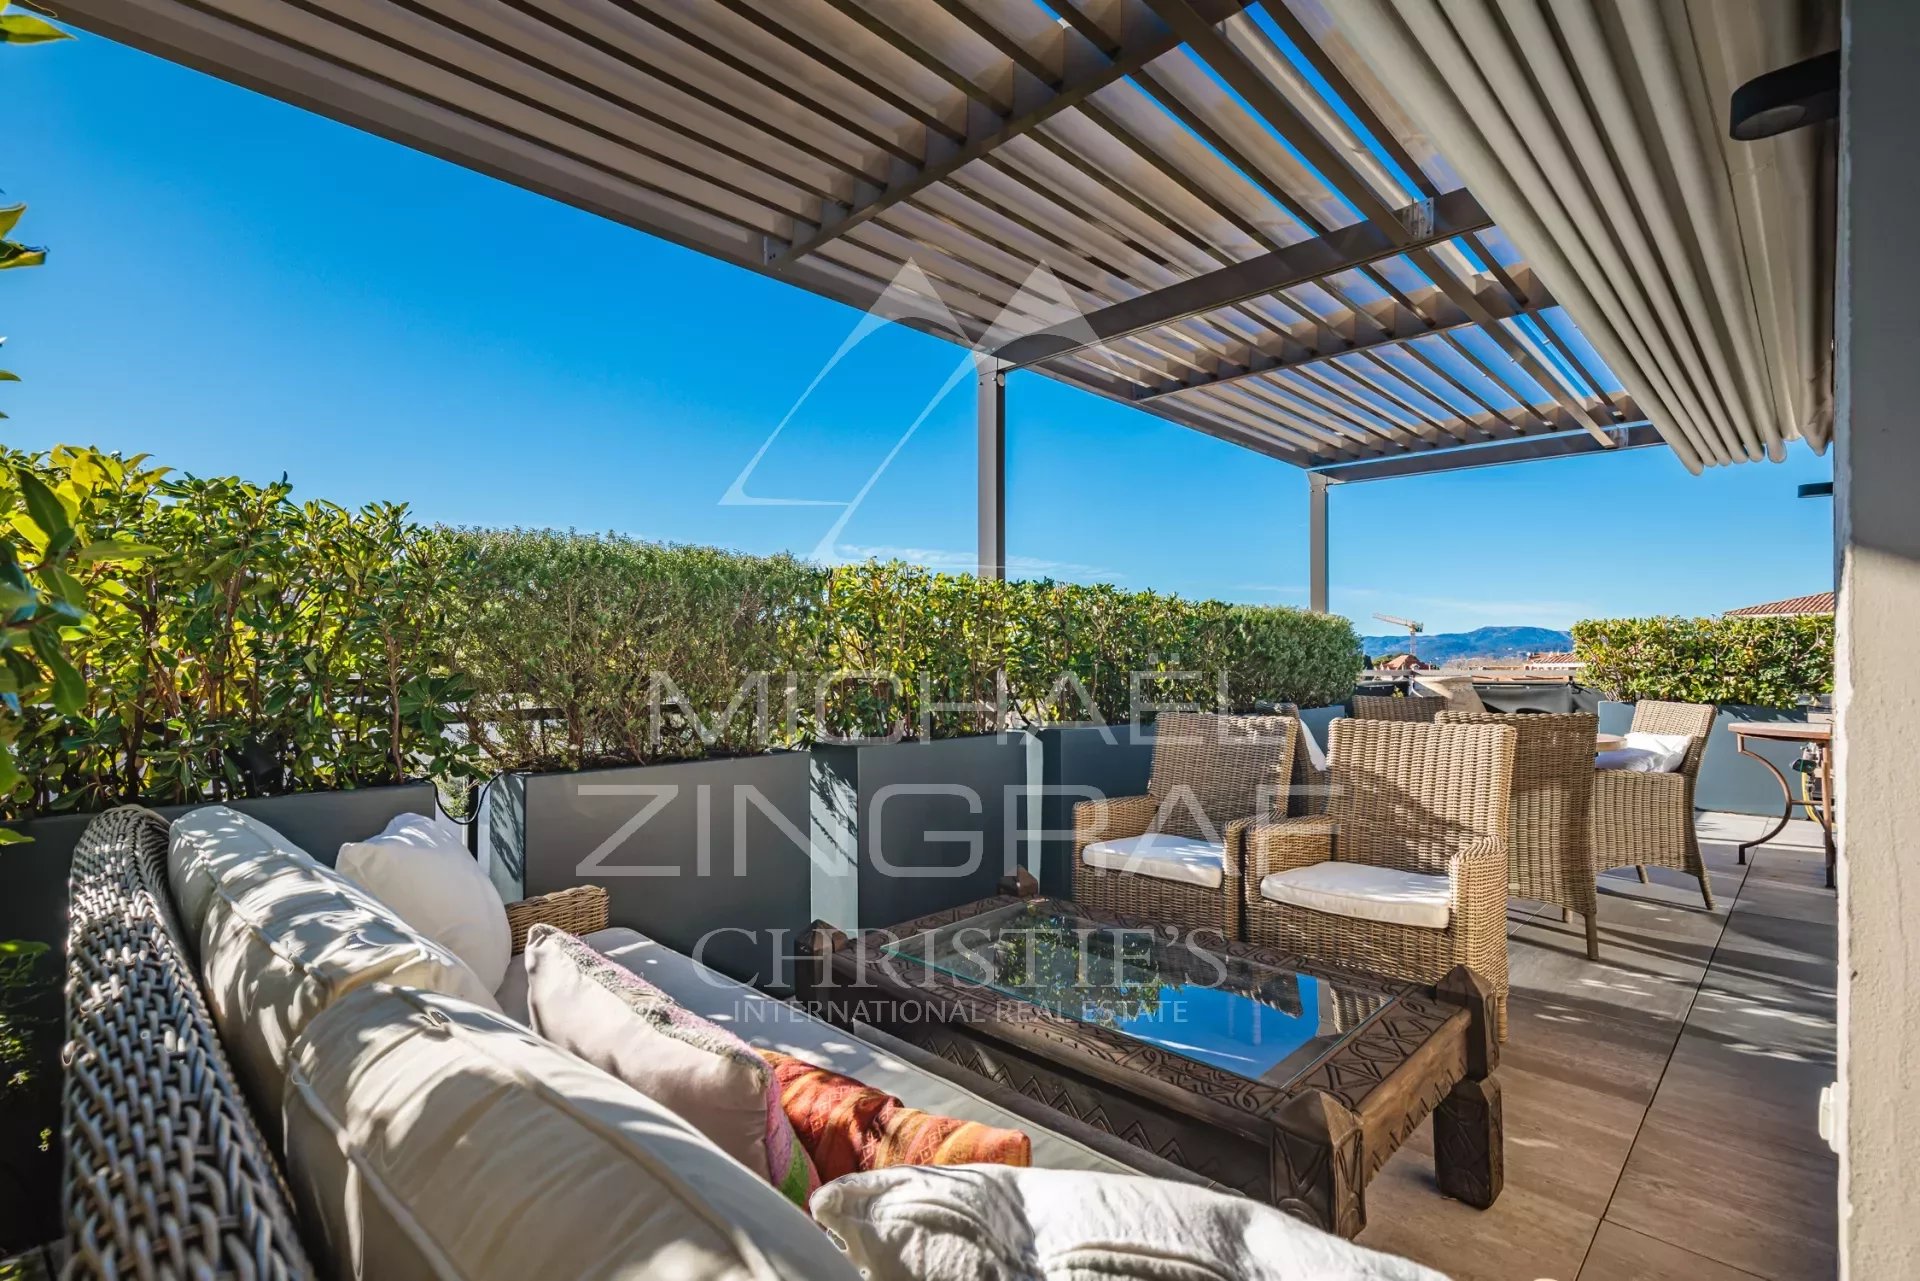 Exceptional 3 bedrooms apartment in the most exclusive heart of Saint Tropez